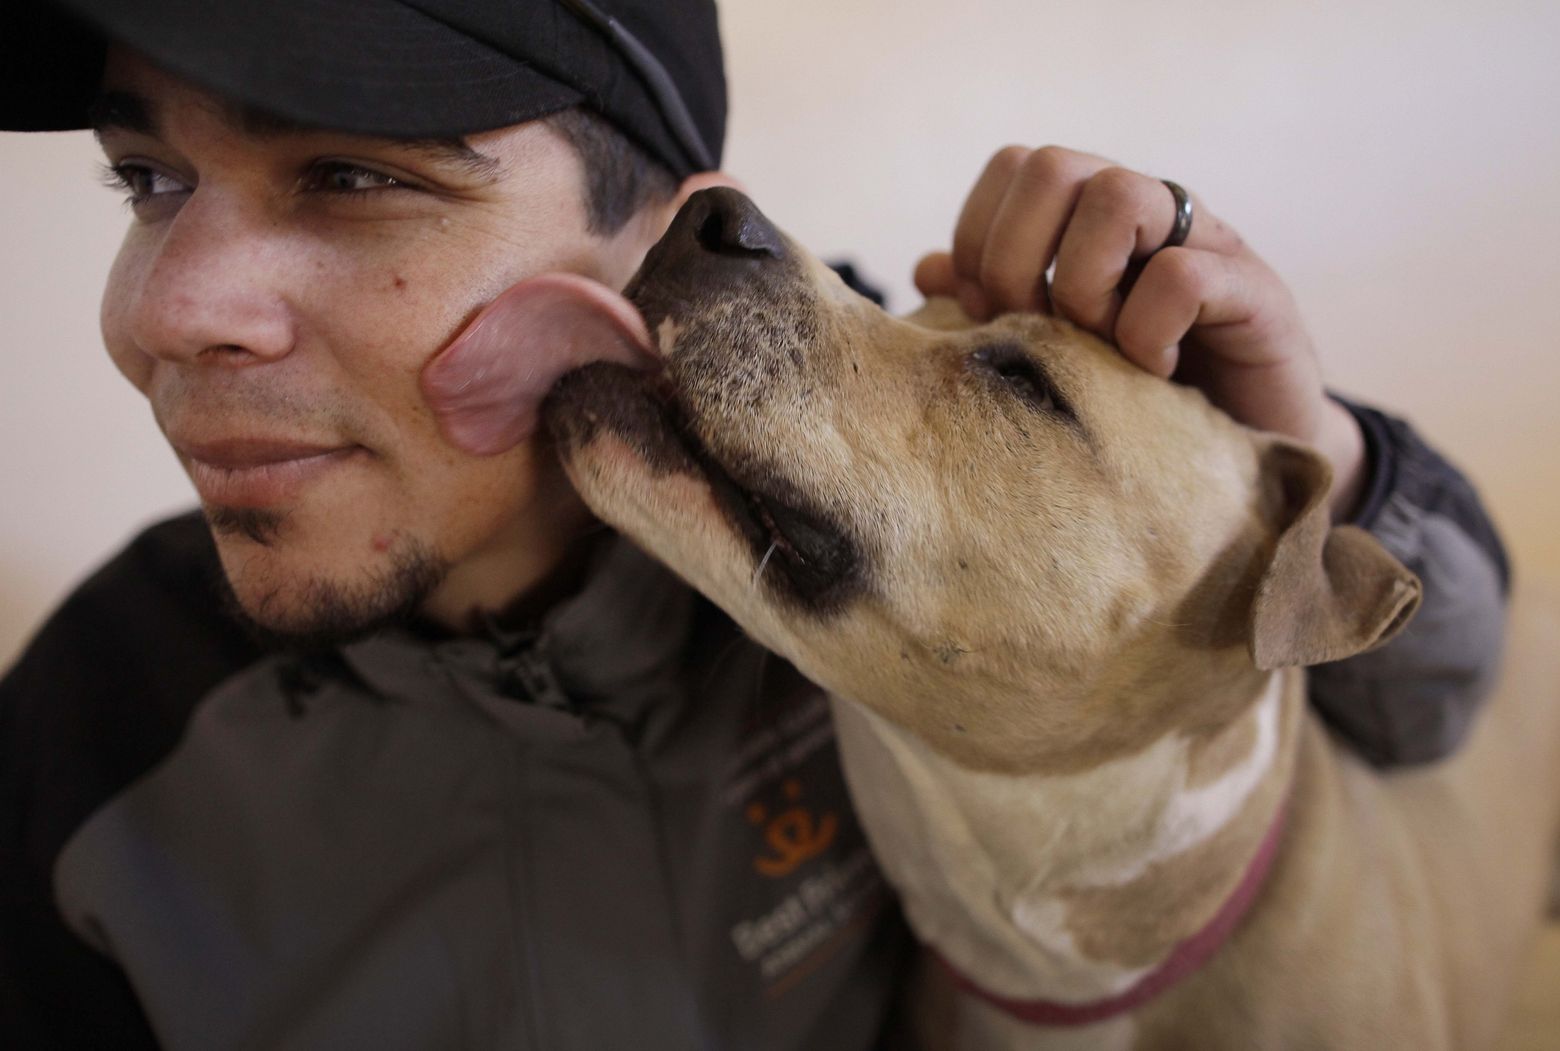 Your dog’s mouth is nasty, say scientists, so kiss him at your own peril